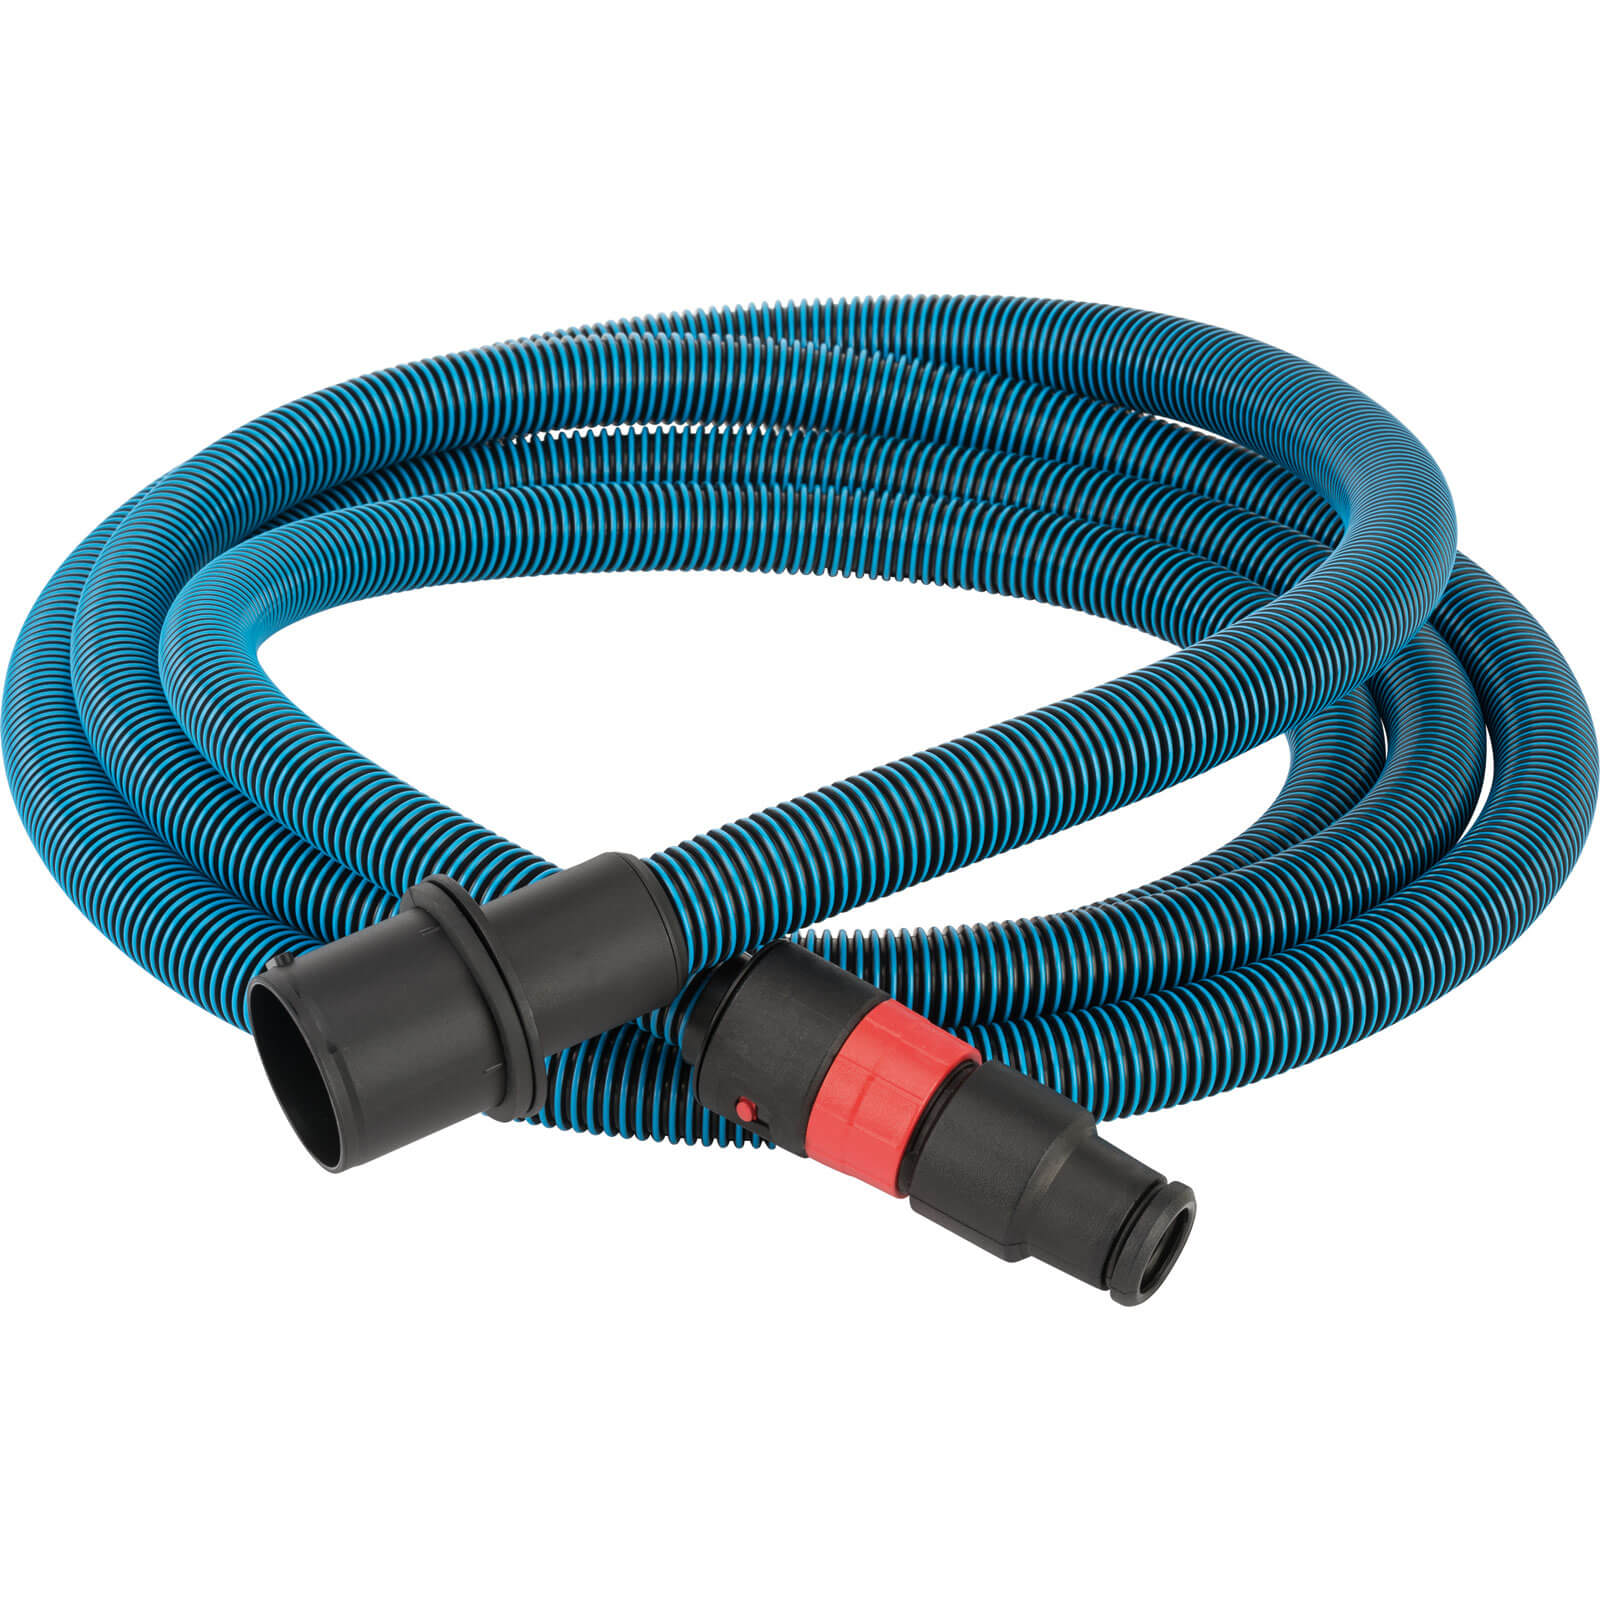 Image of Bosch Antistatic Dust Extractor Hose For GAS Extractors 5m